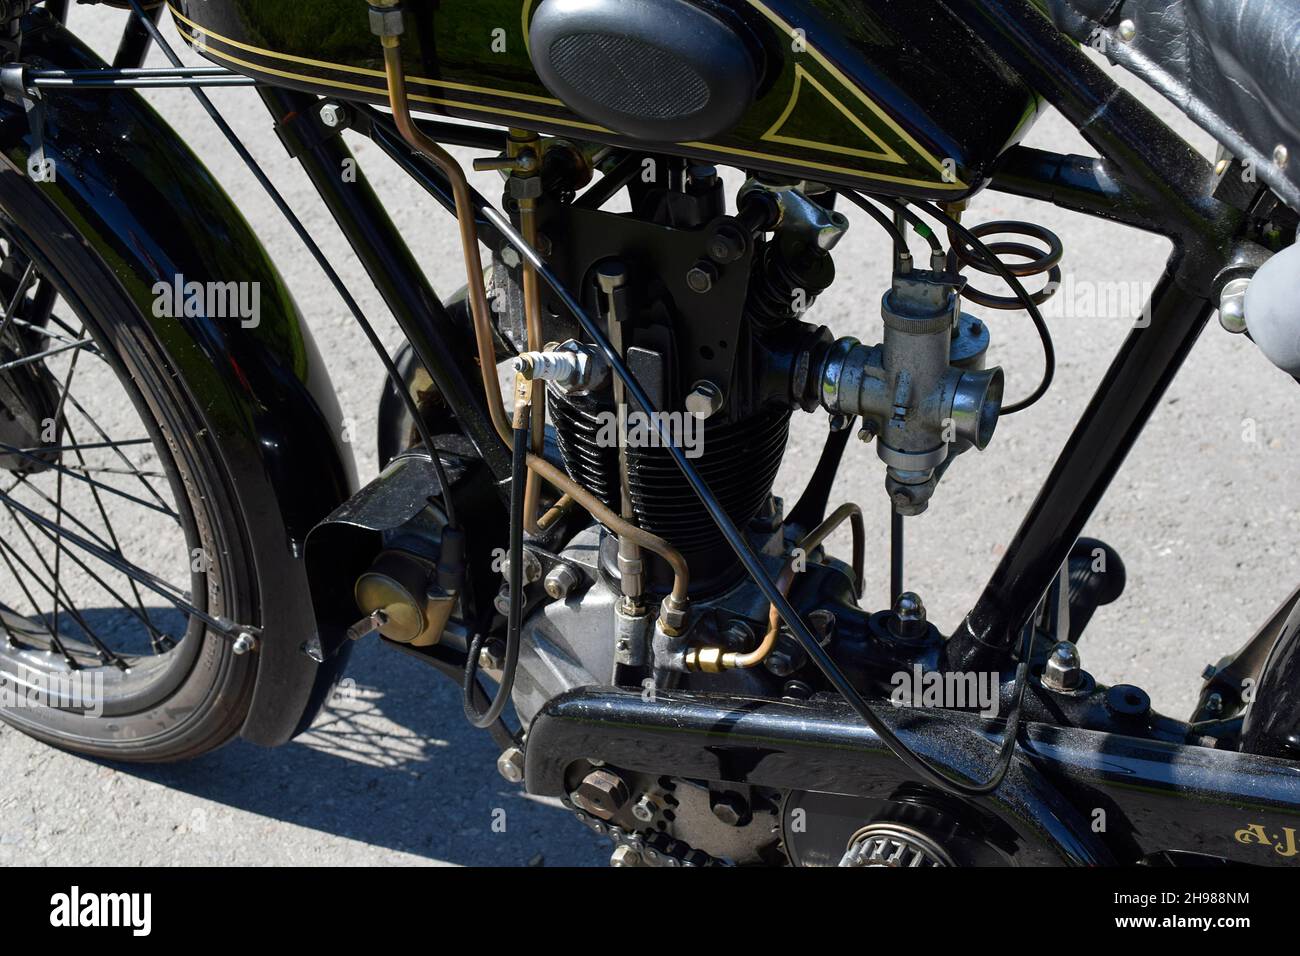 Engine of a 1927 AJS Big Port motorcycle. Stock Photo